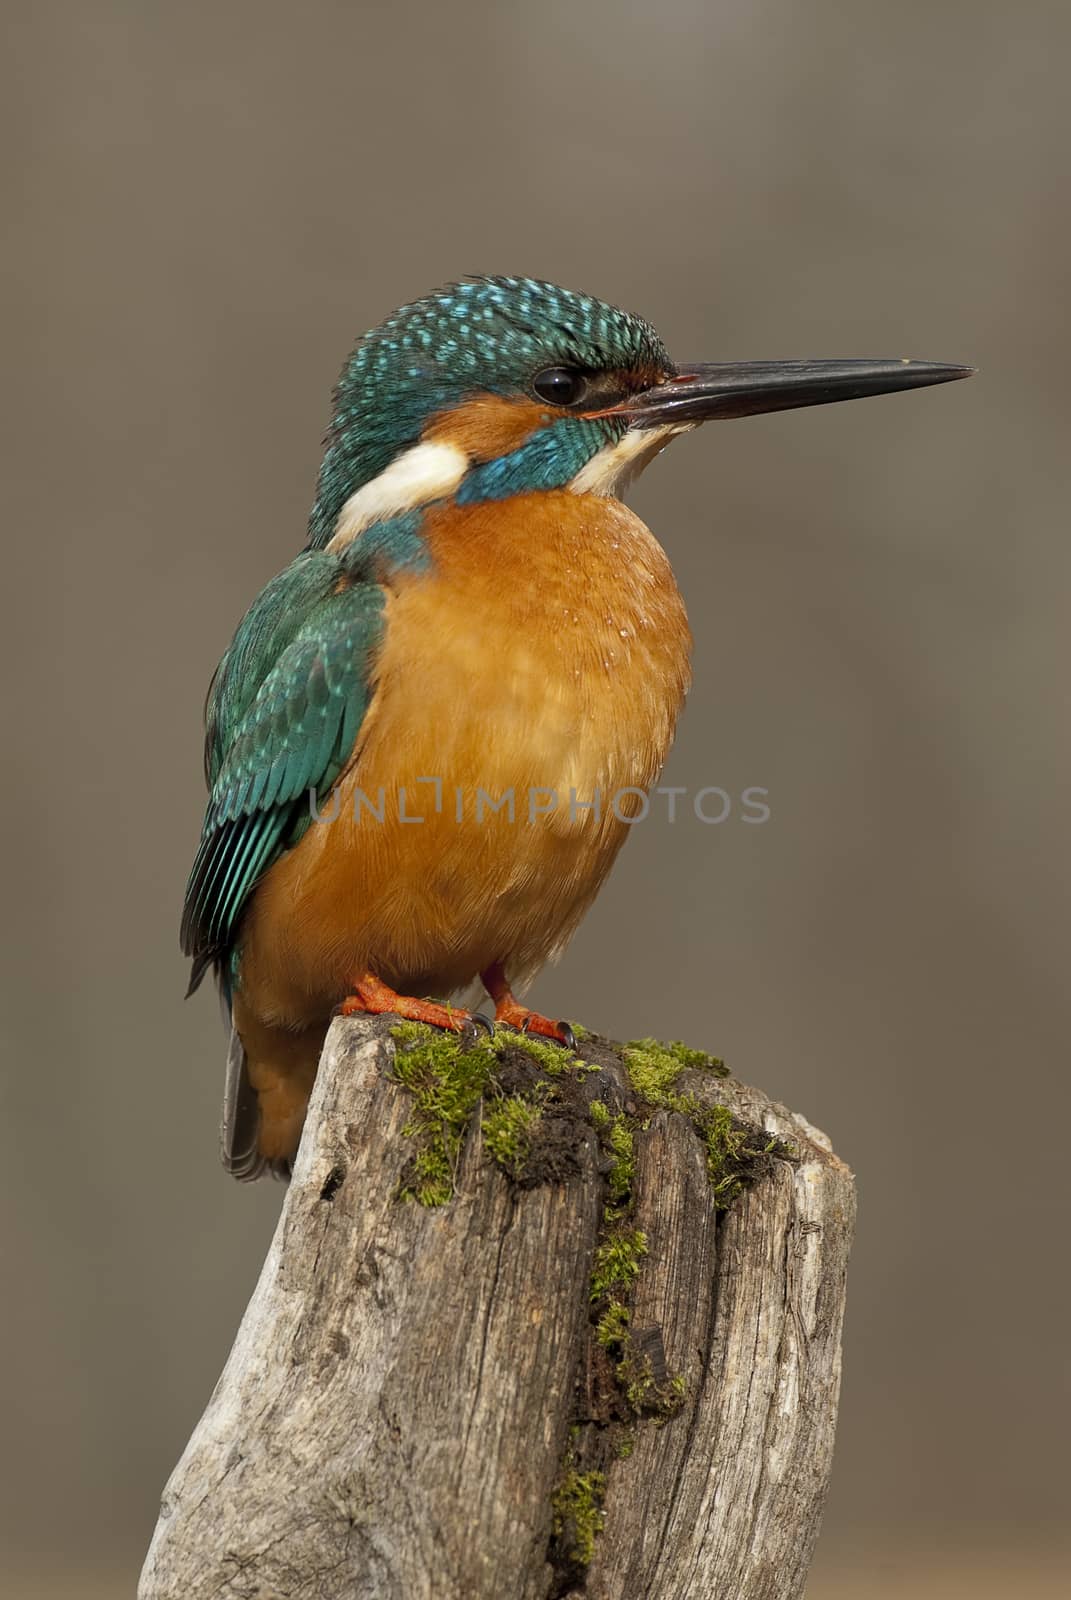 Kingfisher (Alcedo atthis) perched